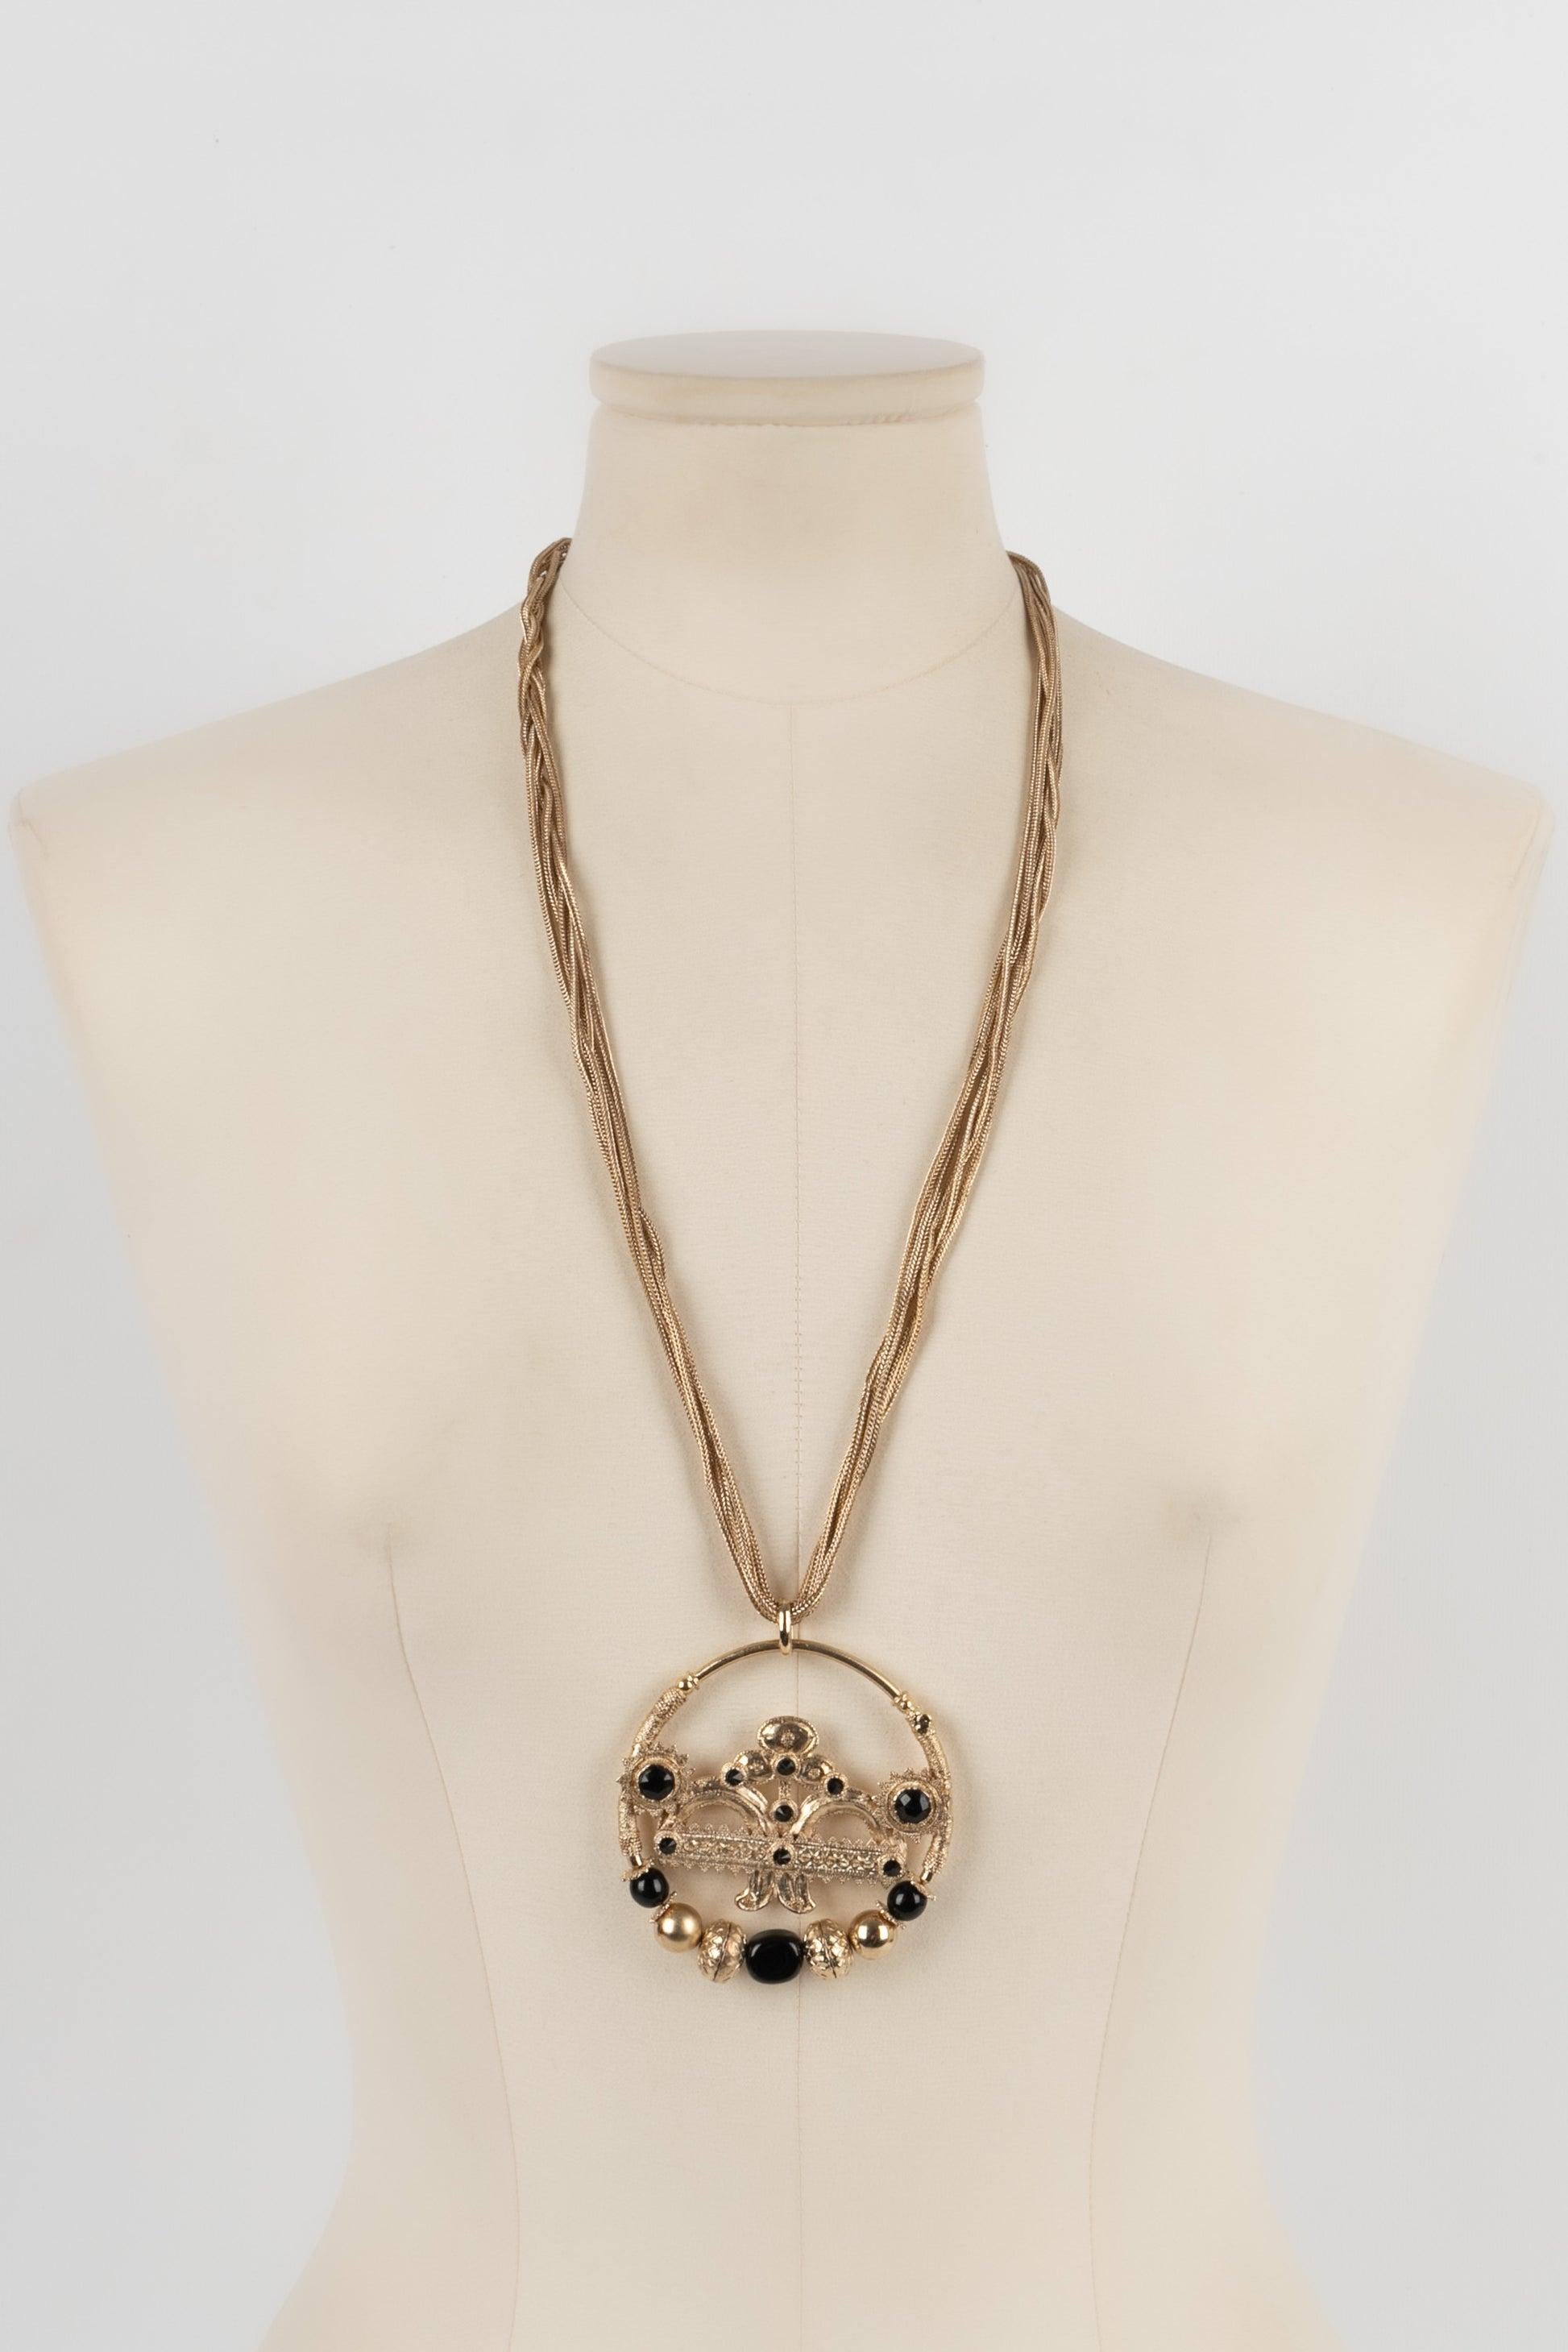 Jean Paul Gaultier Champagne Metal Necklace For Sale 2